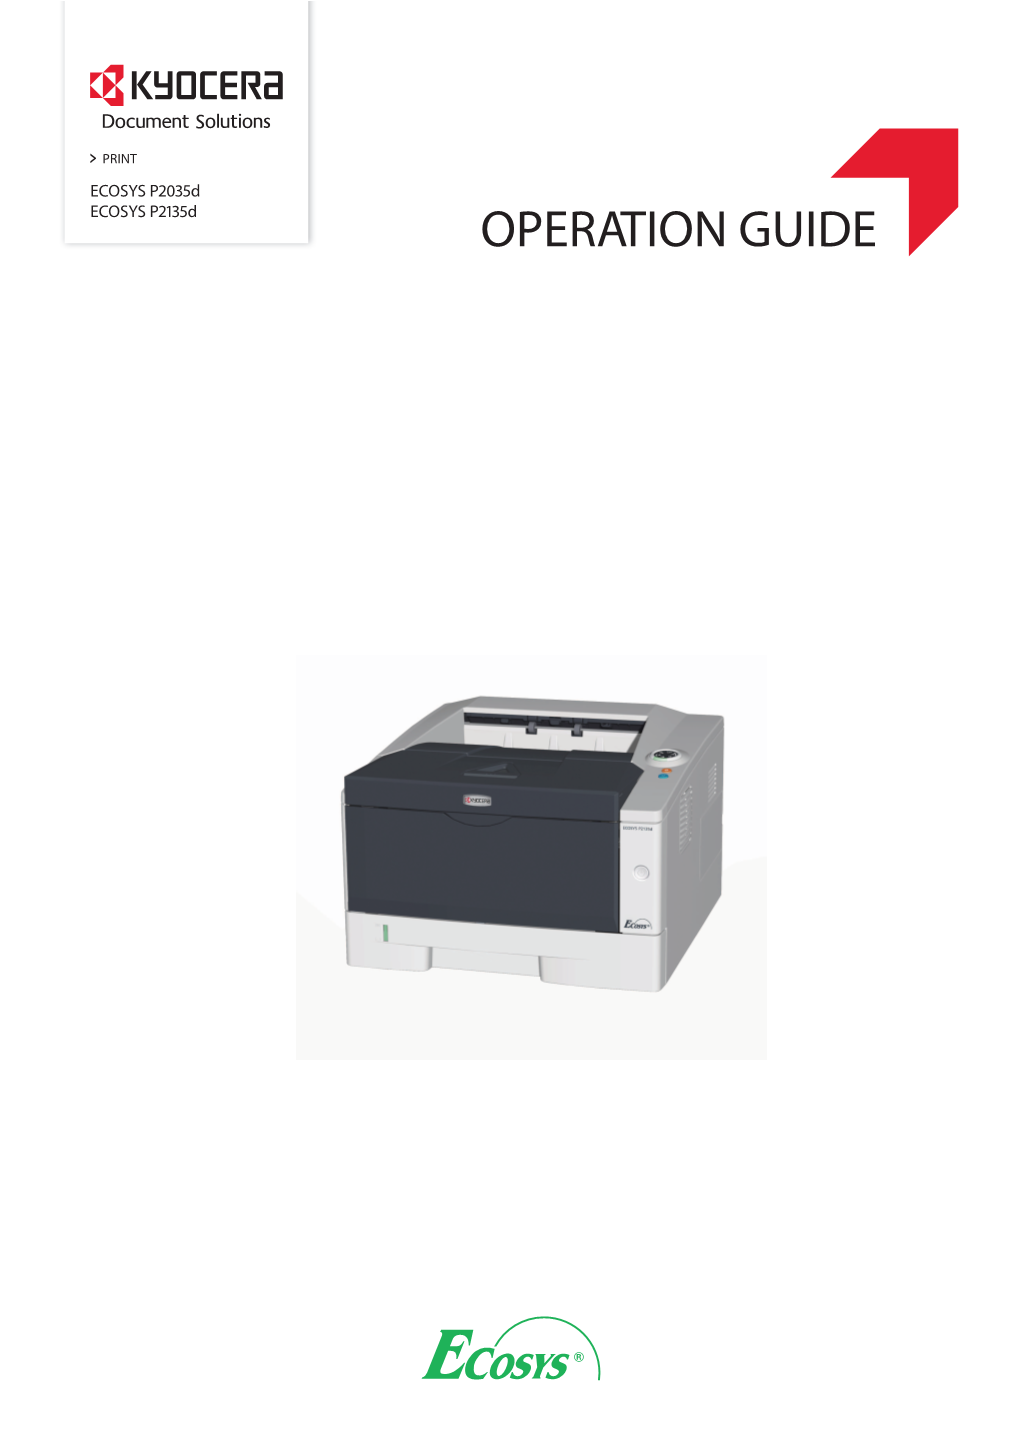 OPERATION GUIDE This Operation Guide Is for Models ECOSYS P2035d and ECOSYS P2135d